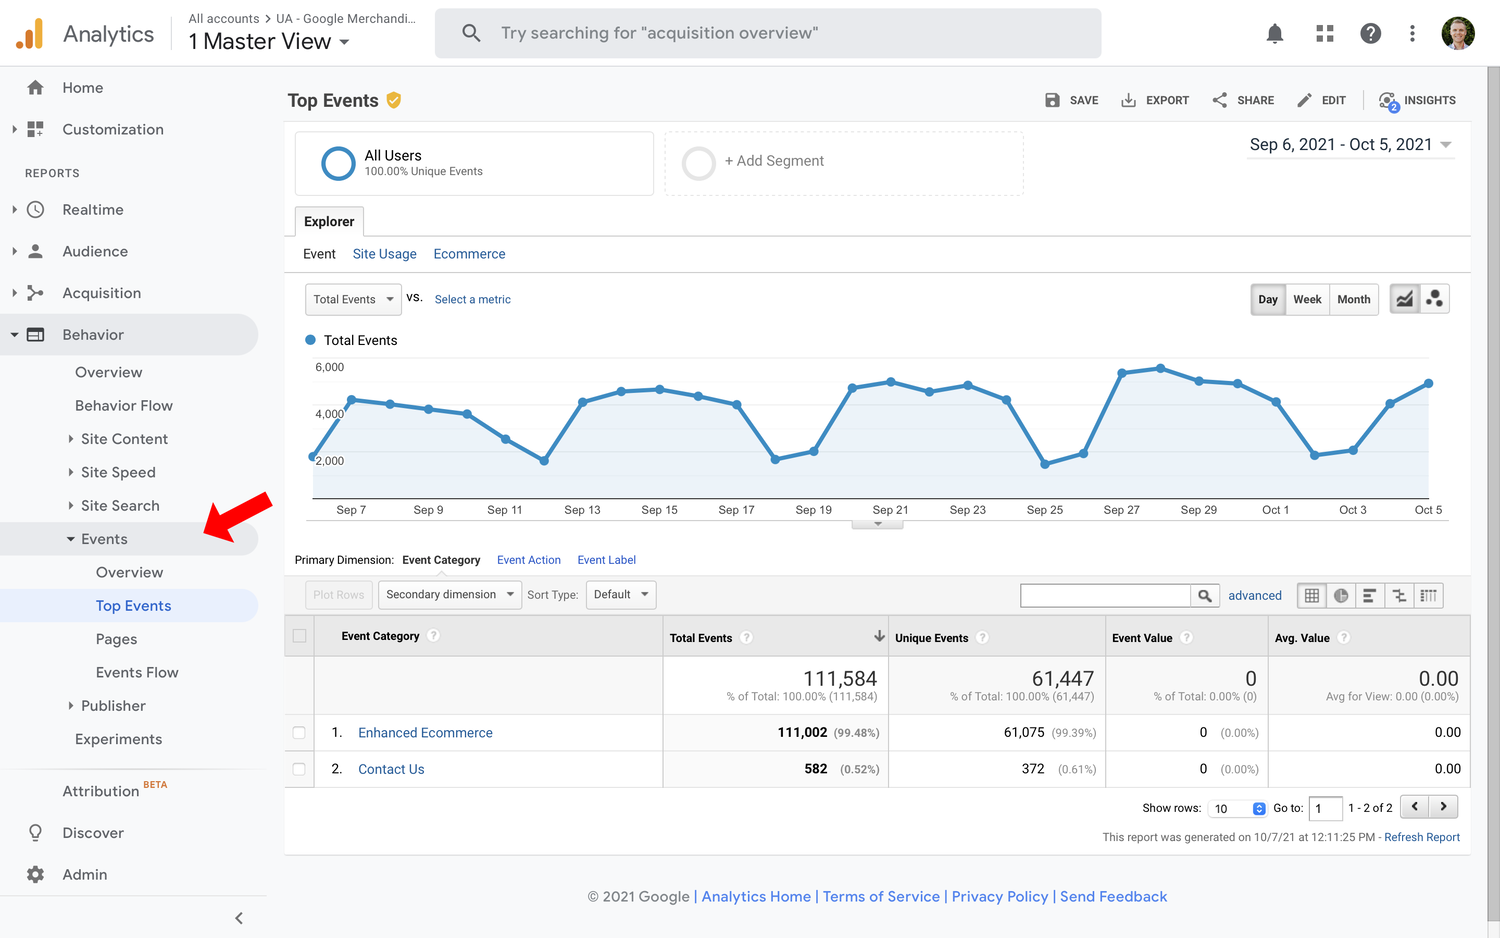 What Is Event Count in Google Analytics?